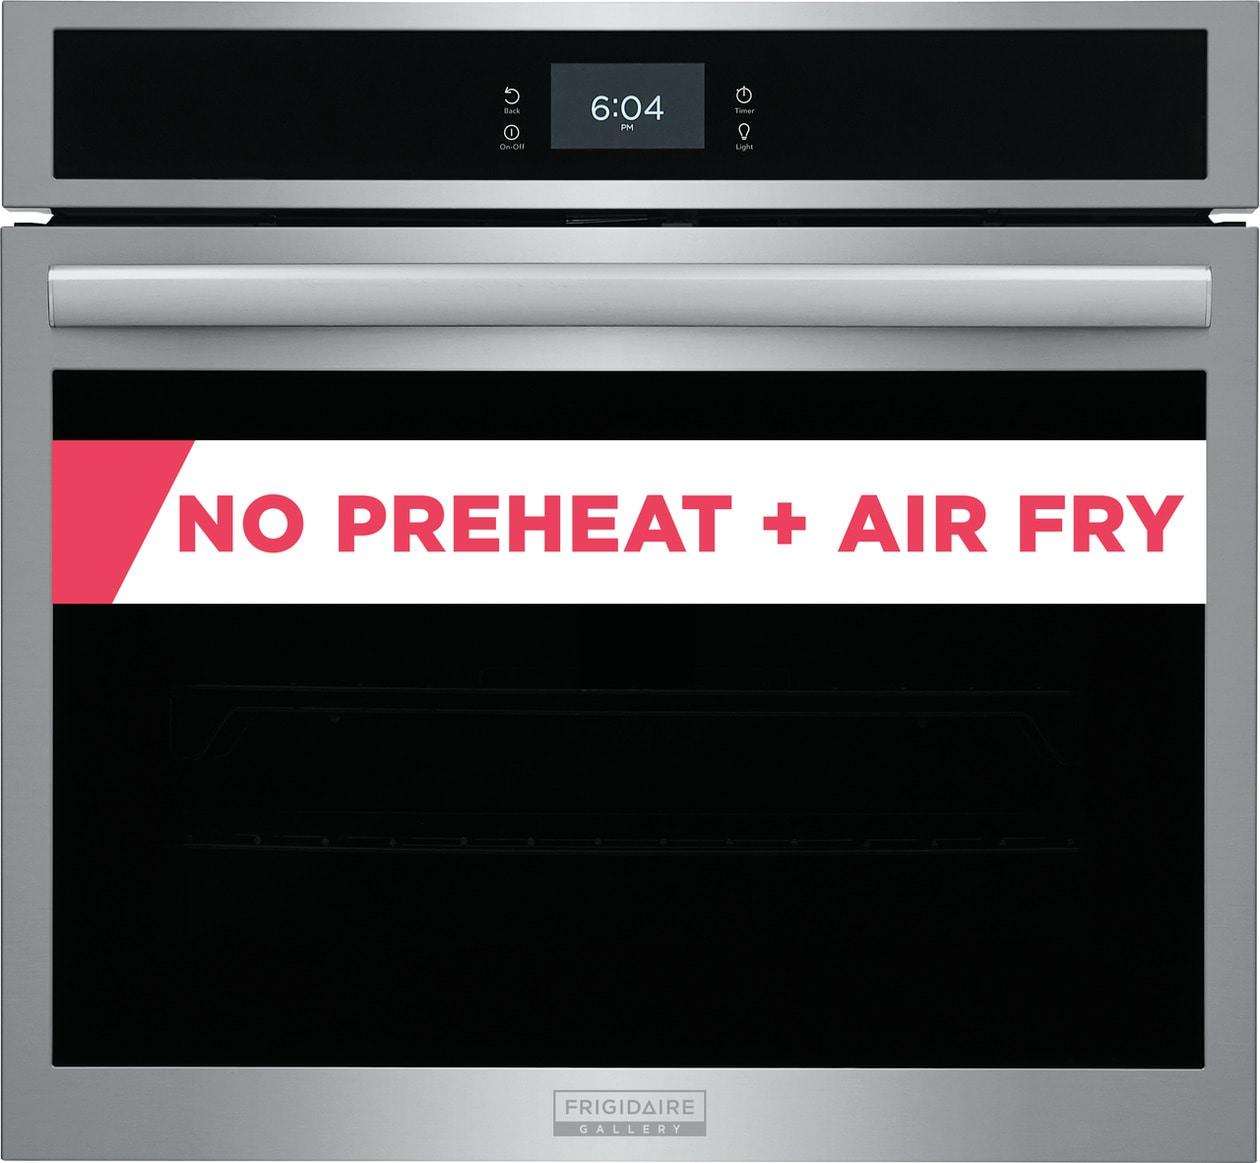 Frigidaire Gallery 30" Single Electric Wall Oven with Total Convection